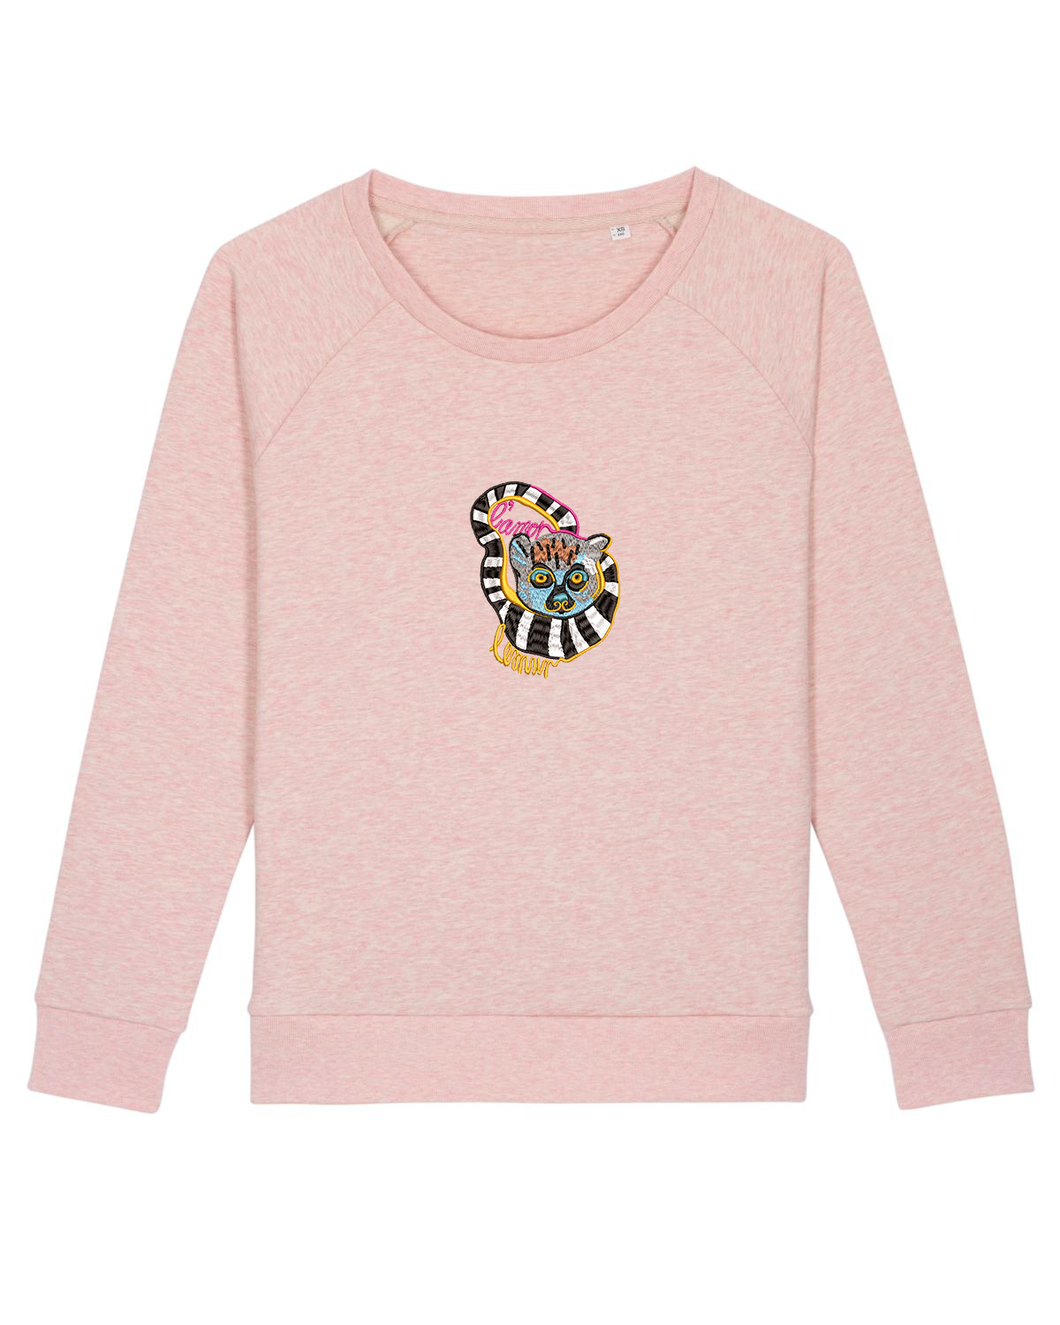 Lemur L'amor - Embroidered WOMEN'S RELAXED FIT SWEATSHIRT